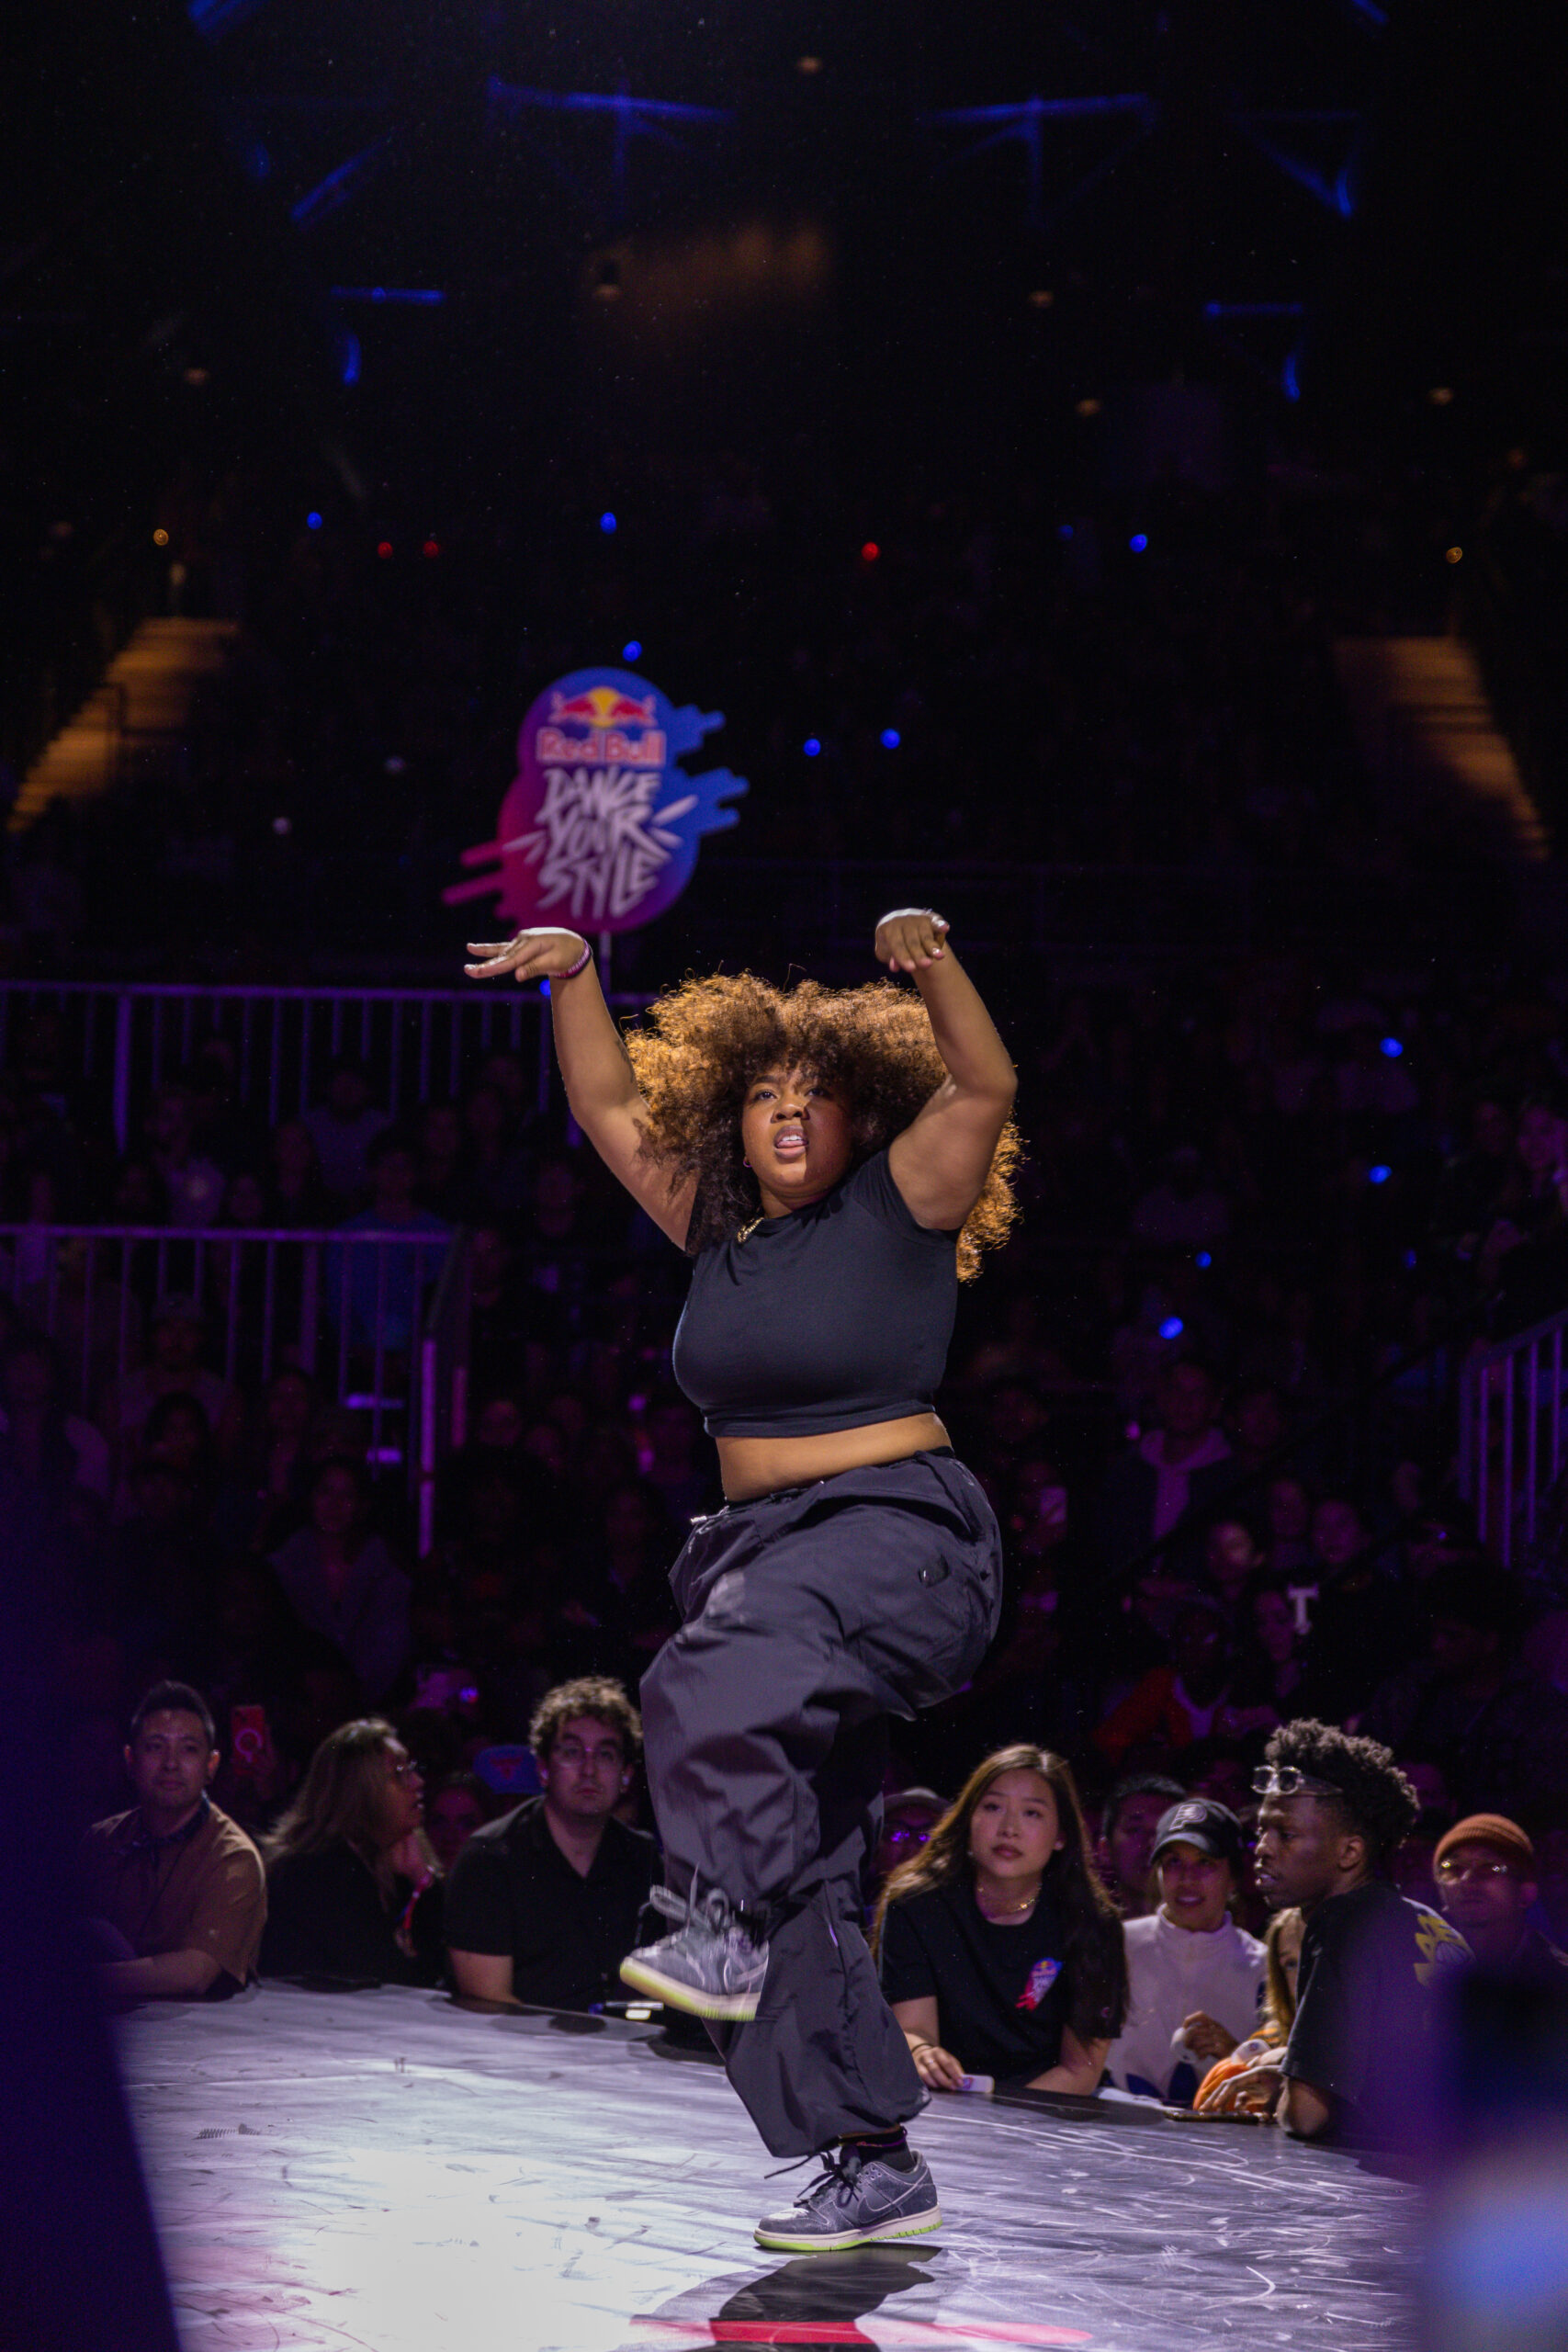 Red Bull Dance Your Style Lights Up Chicago For National Finals